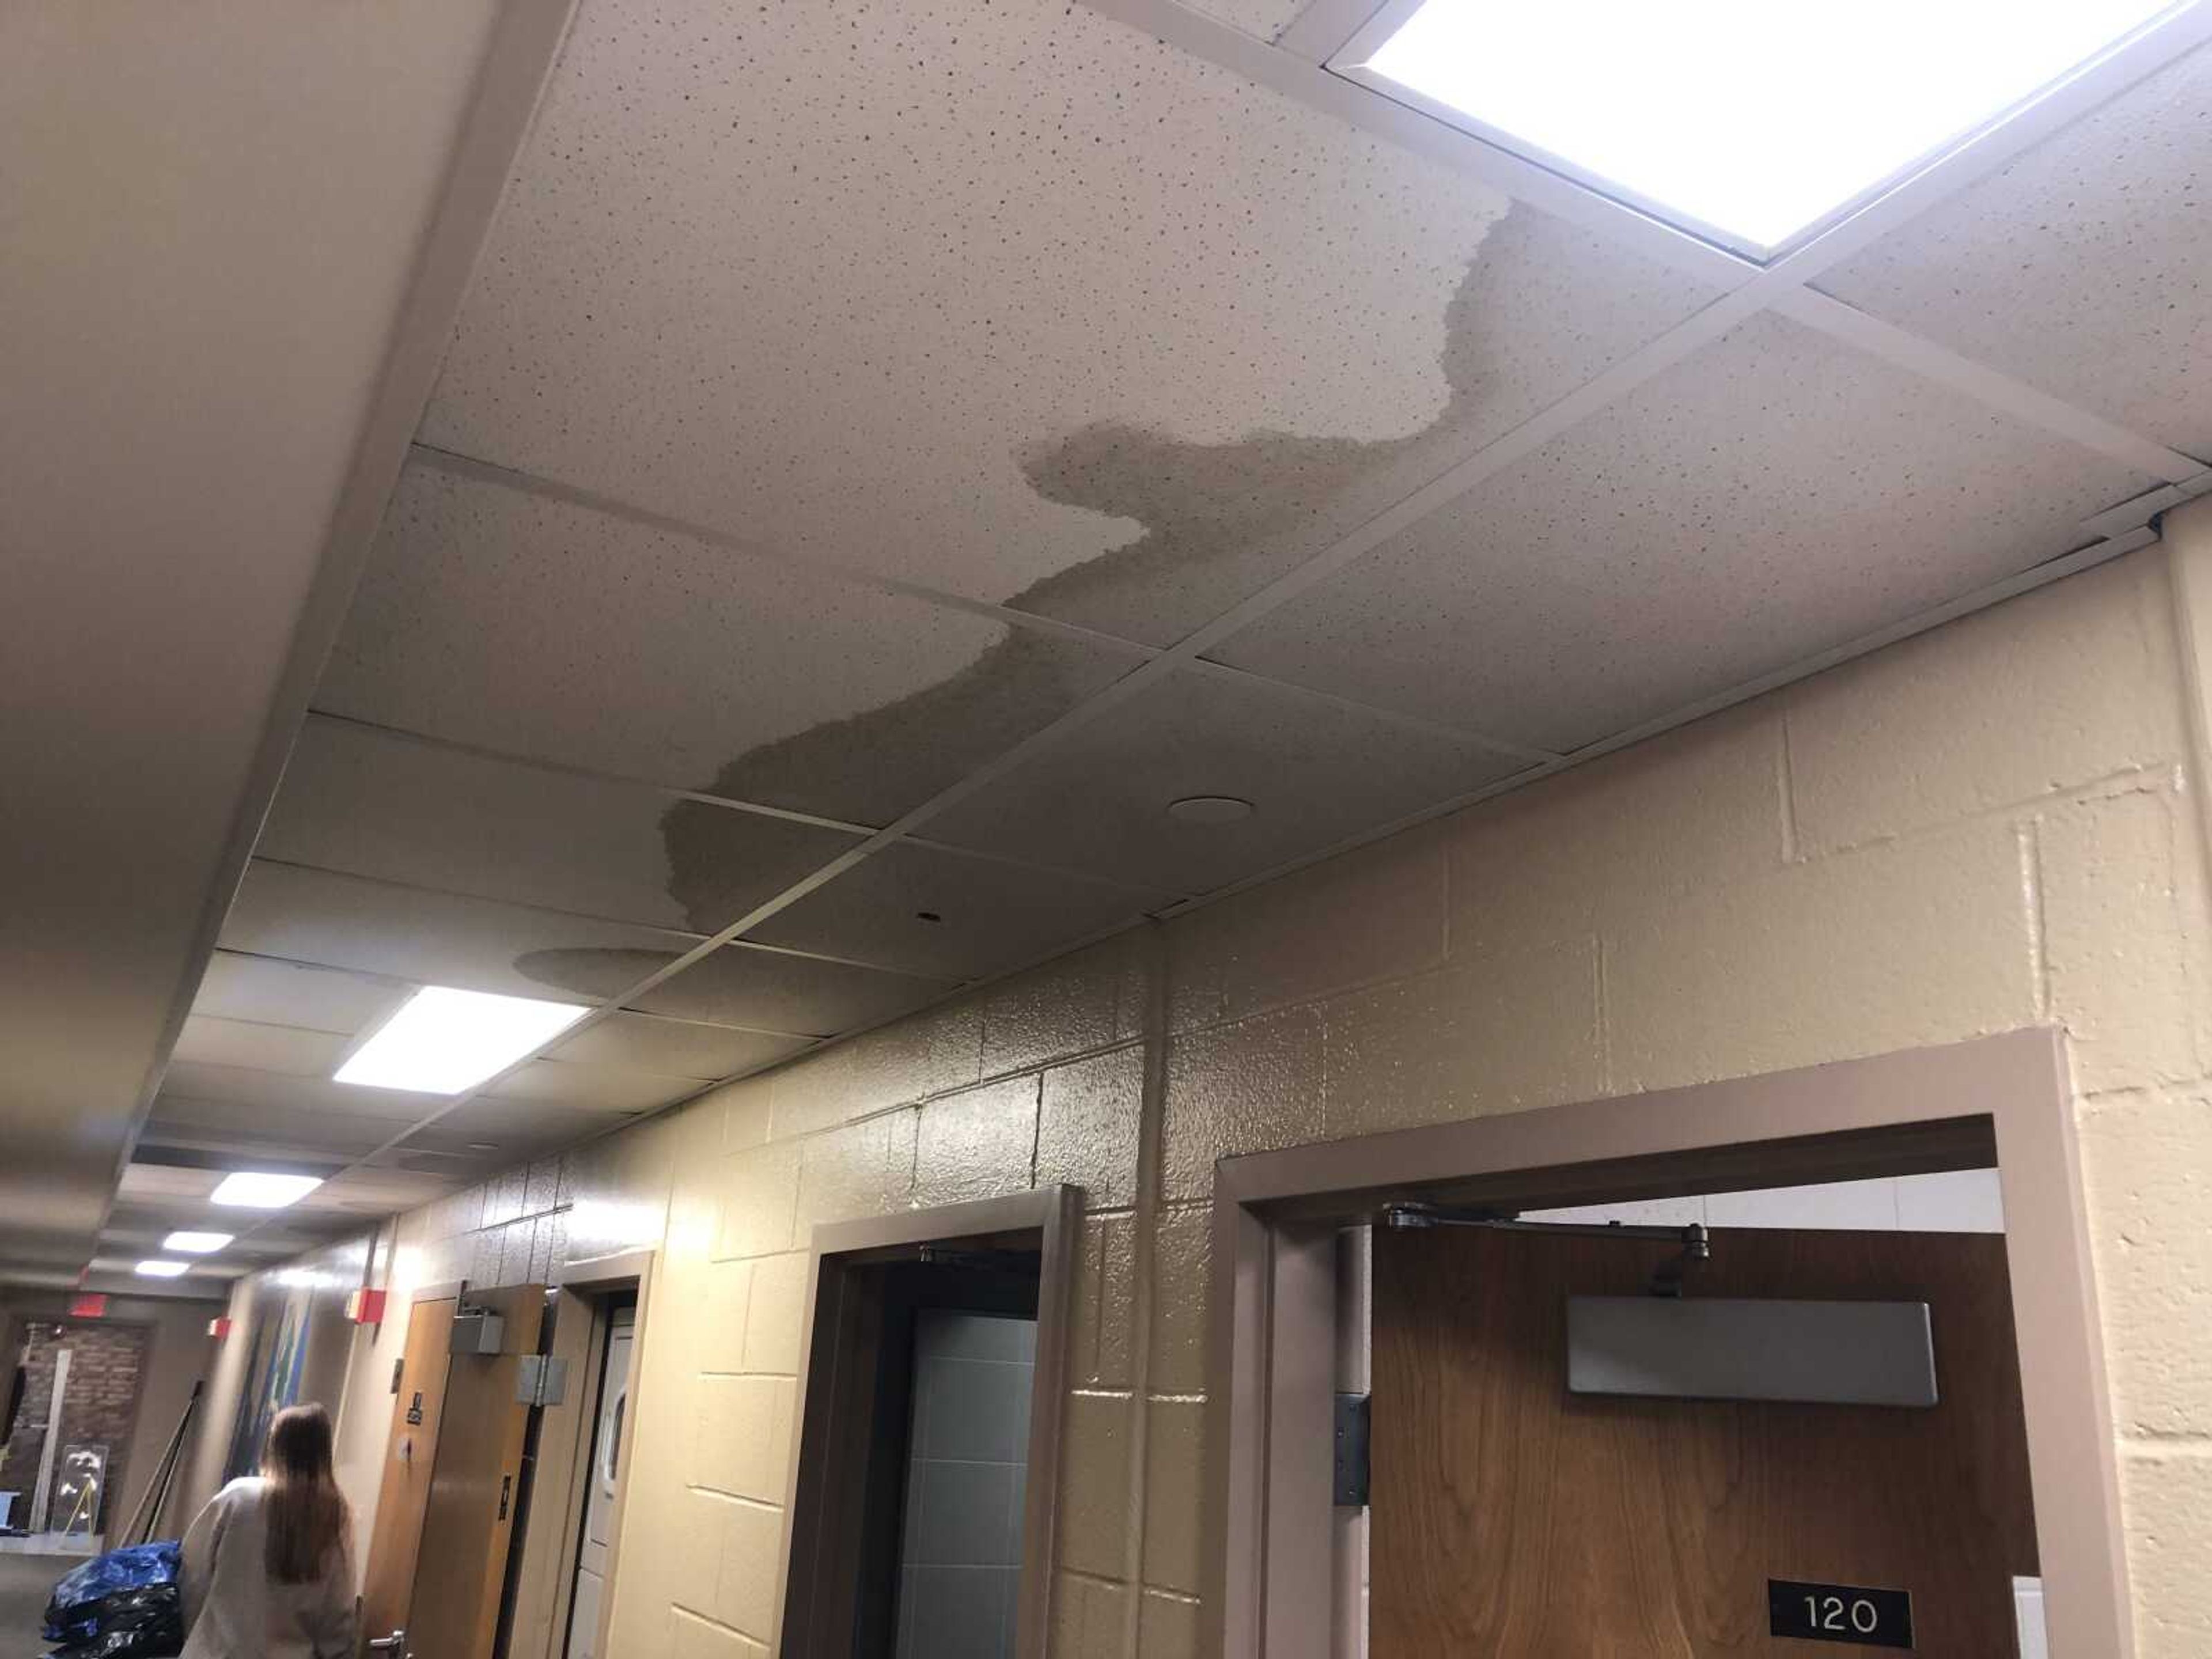 Ceiling tiles in the basement of the Delta Delta Delta house show water damage after the house flooded on Saturday, Nov. 9.